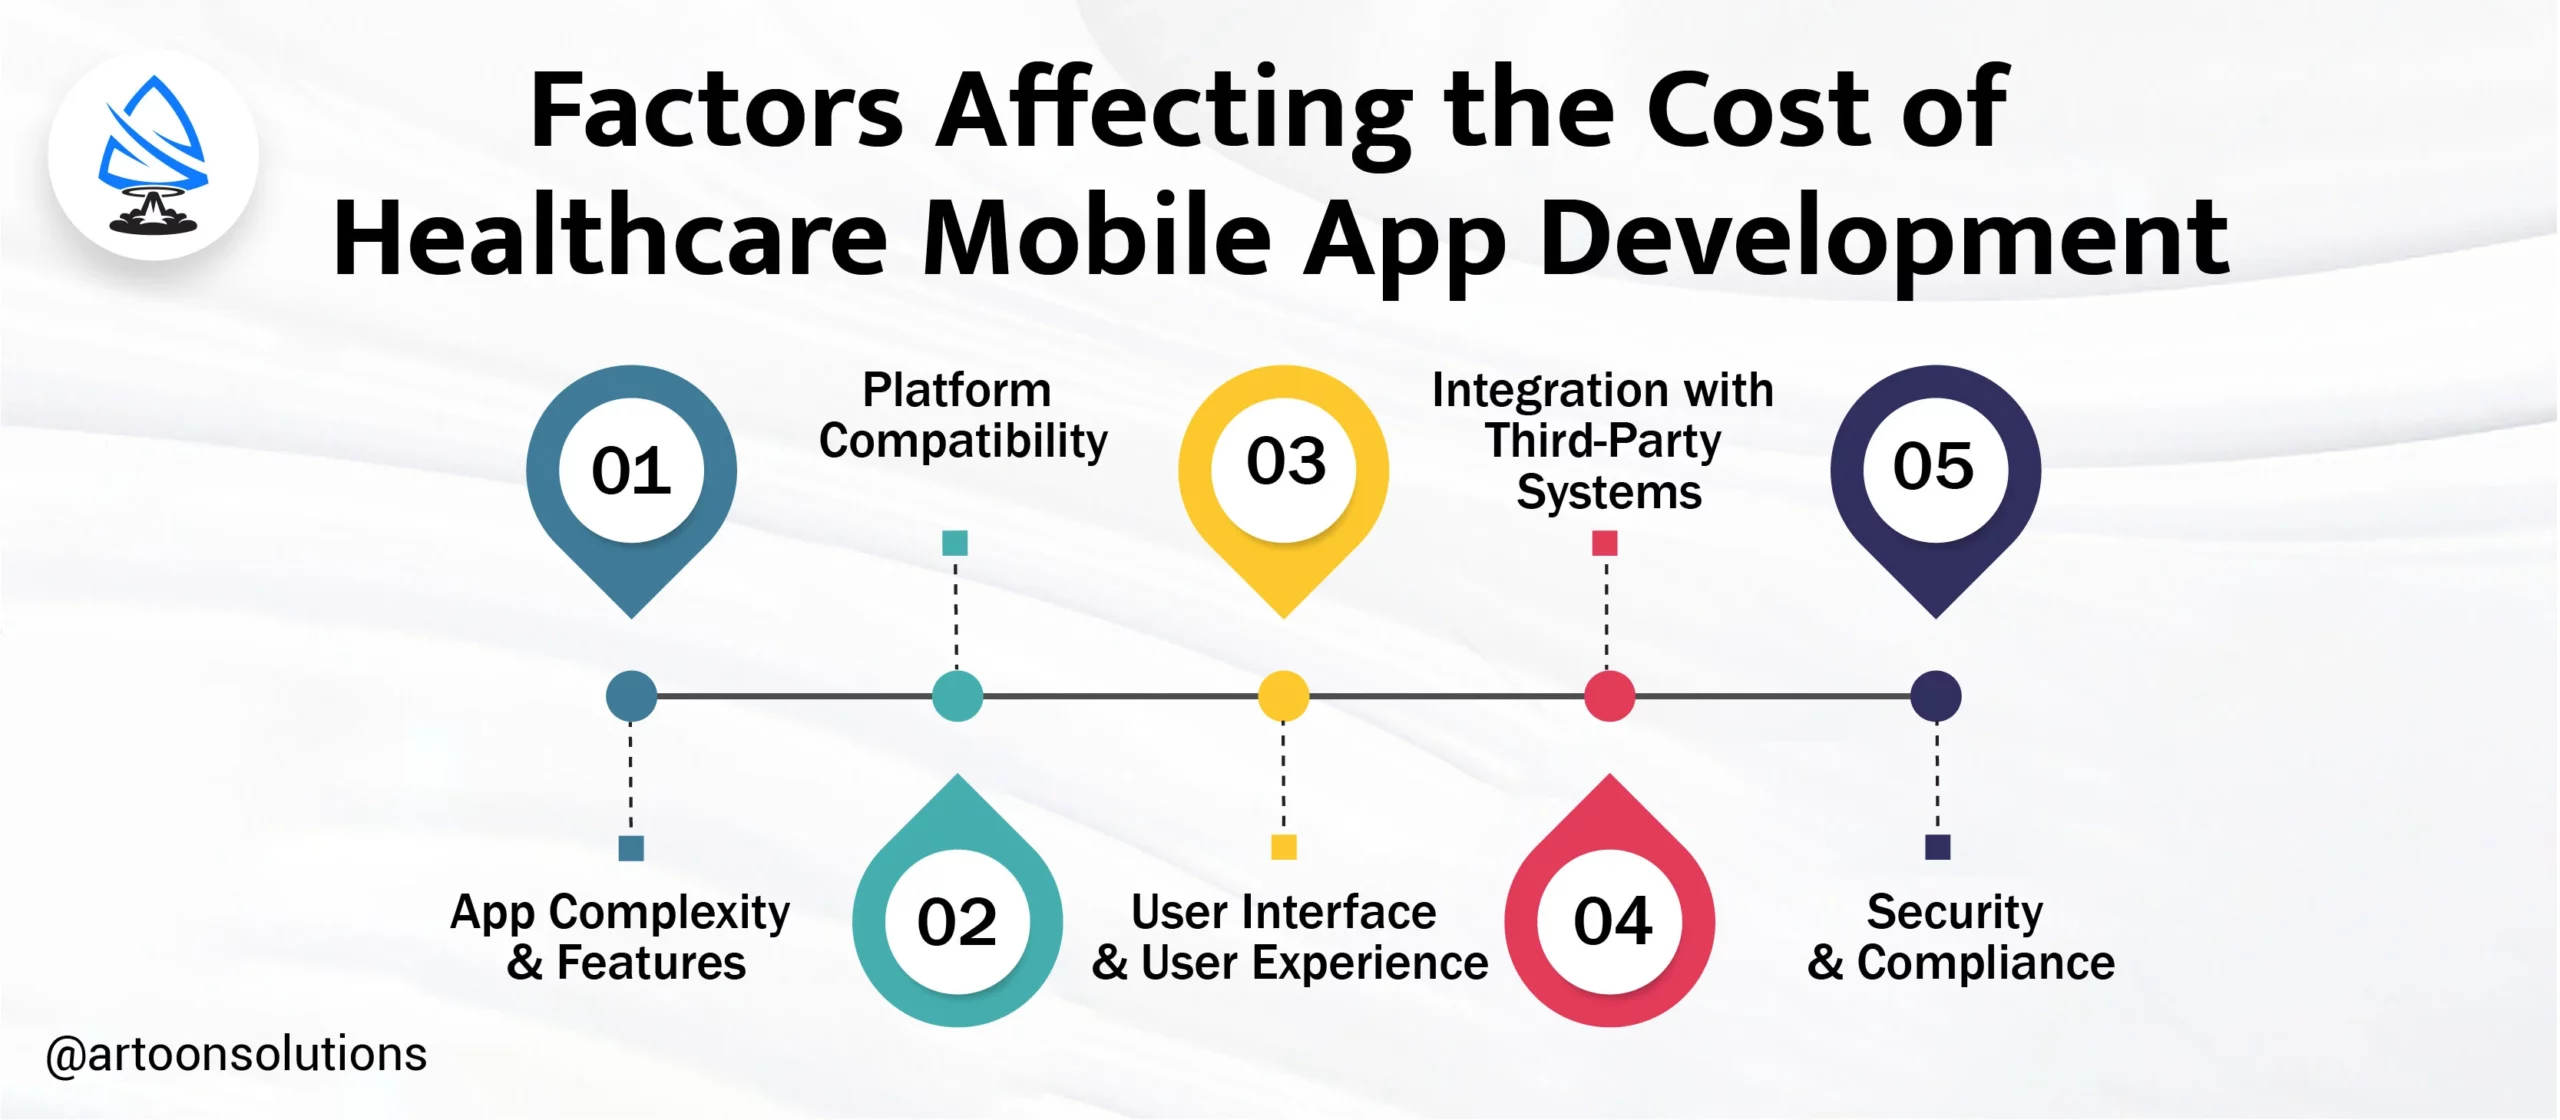 Factors Affecting the Cost of Healthcare Mobile App Development